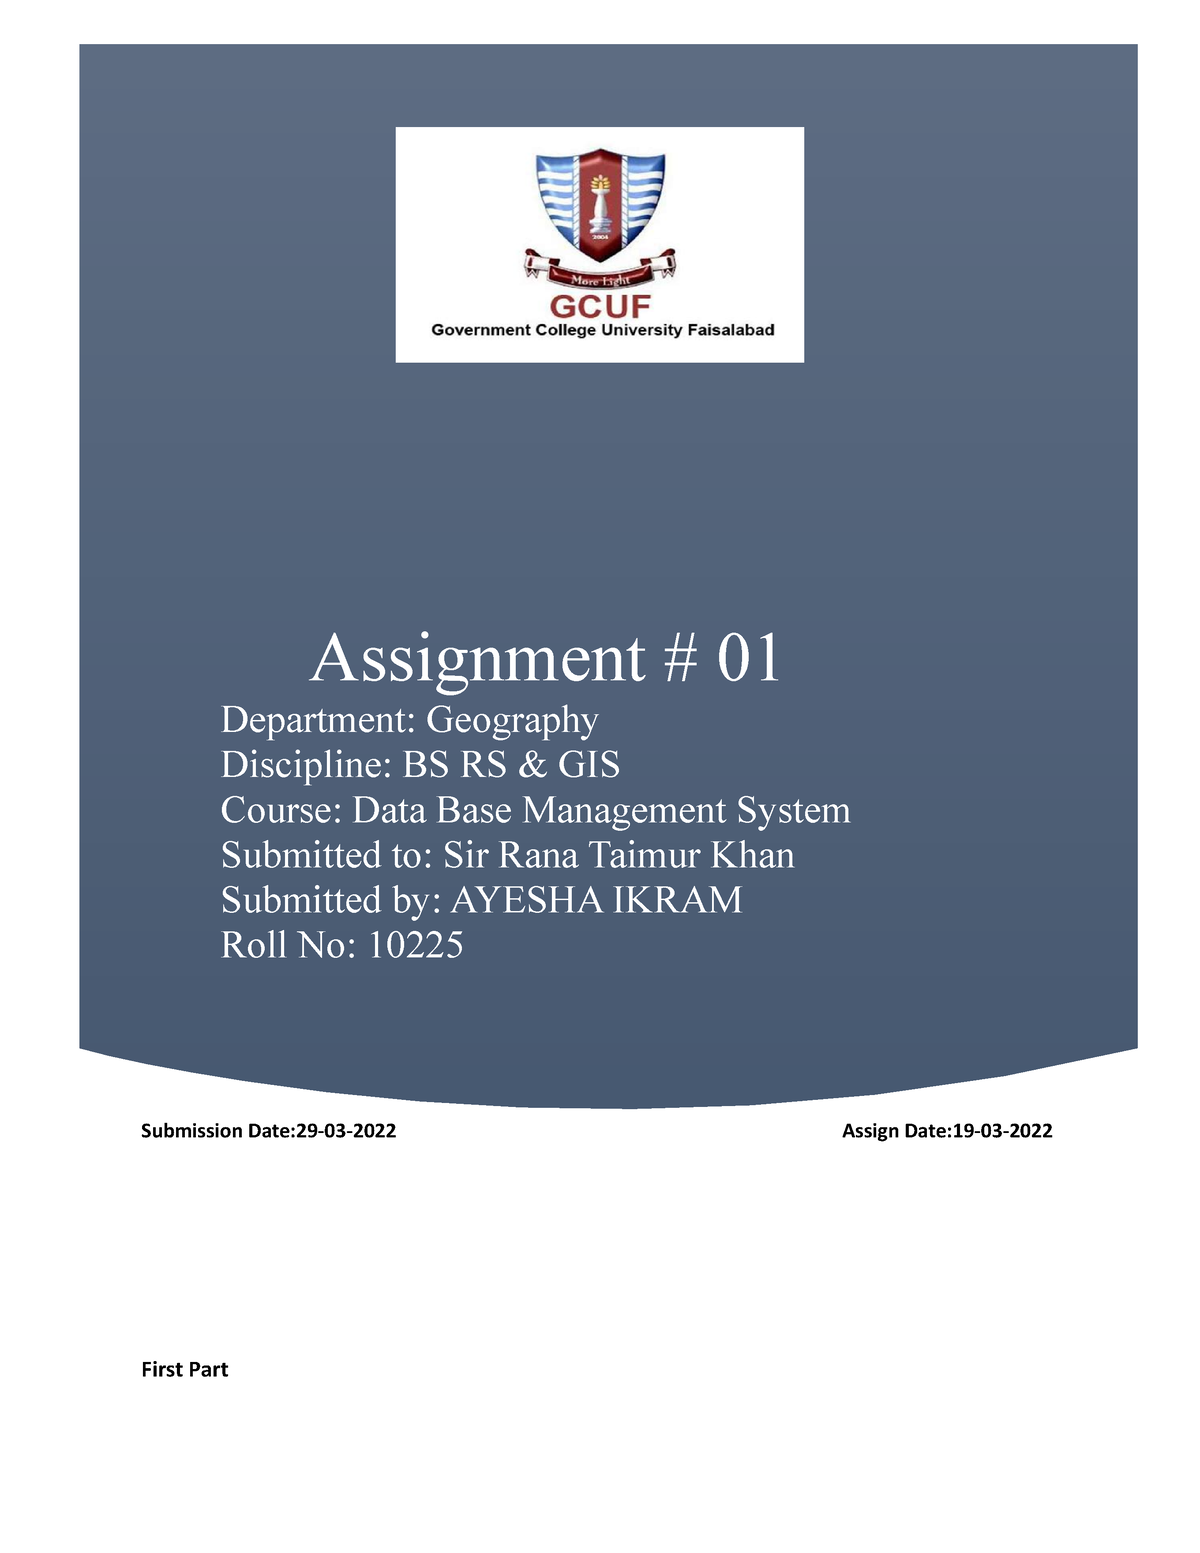 gcuf assignment title page doc